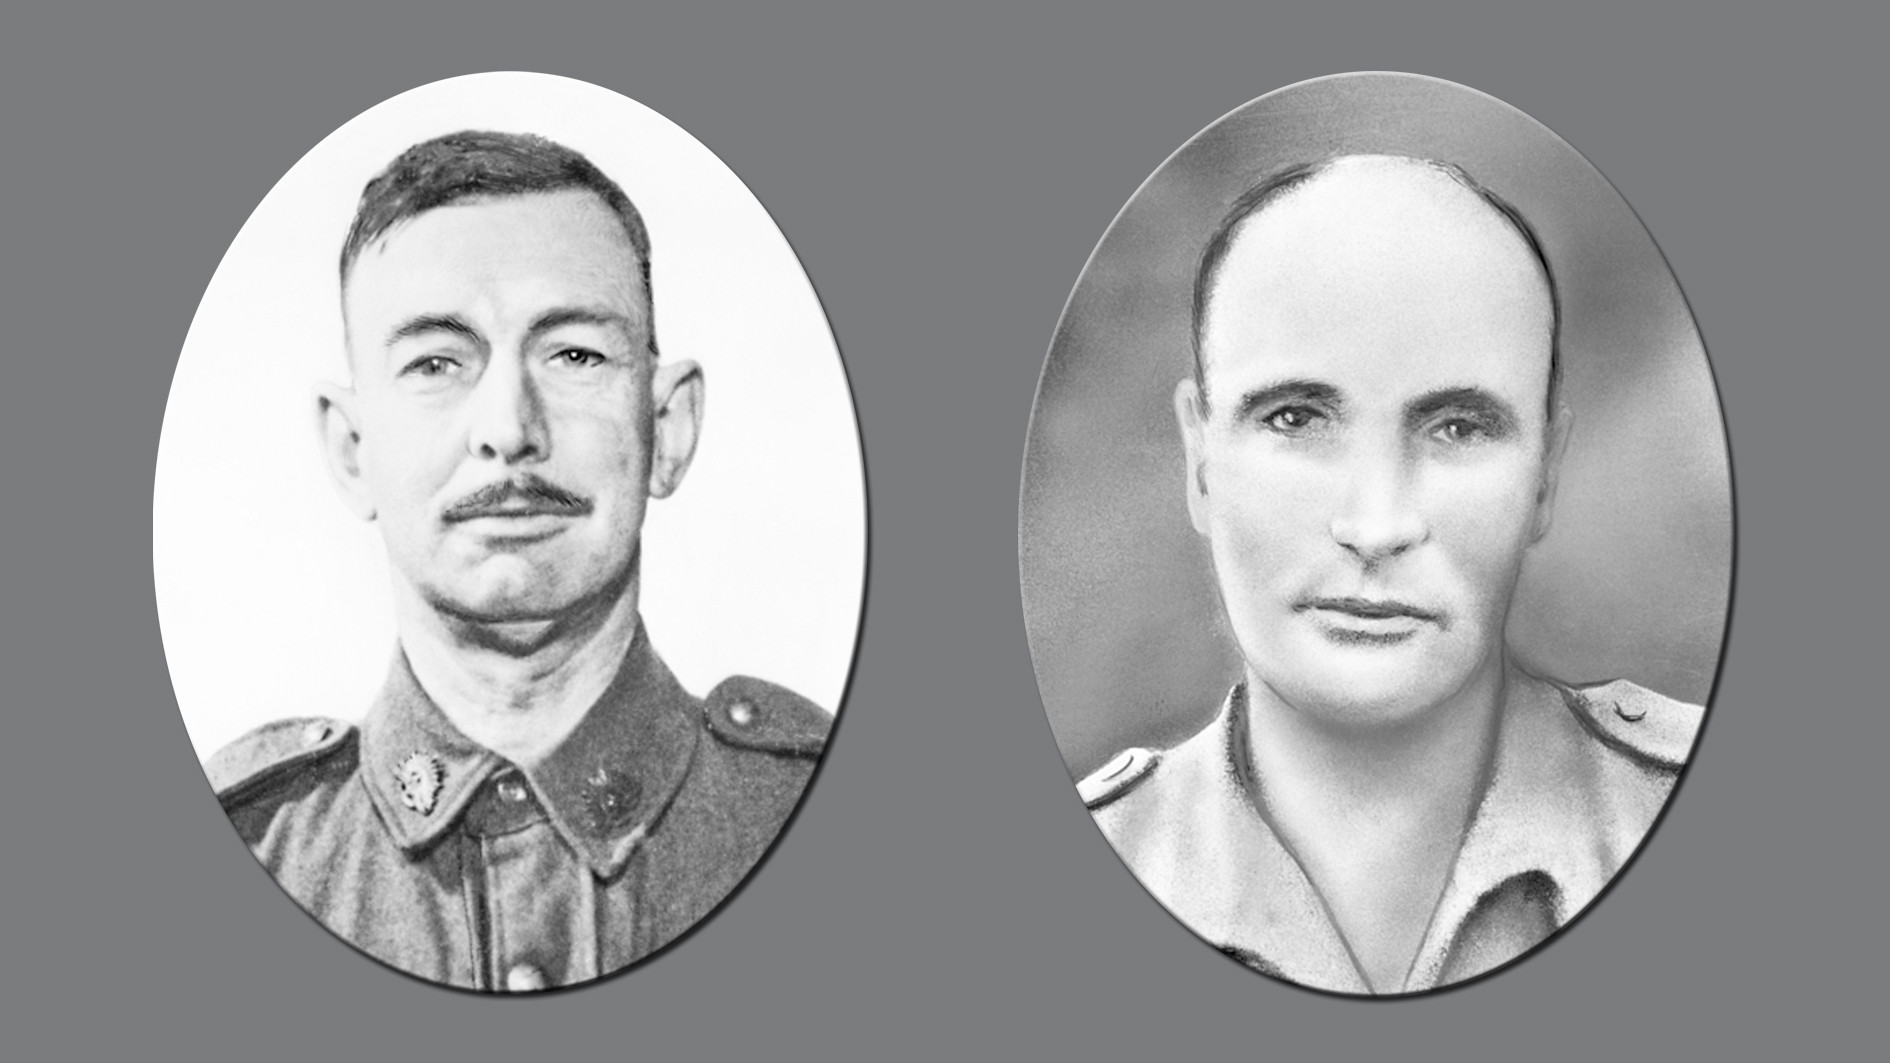 Private Benjamin Gower Hardy, G.C. and Private Ralph Jones, G.C., heroes of the Cowra P.O.W. breakout. (Courtesy of The Australian War Memorial).